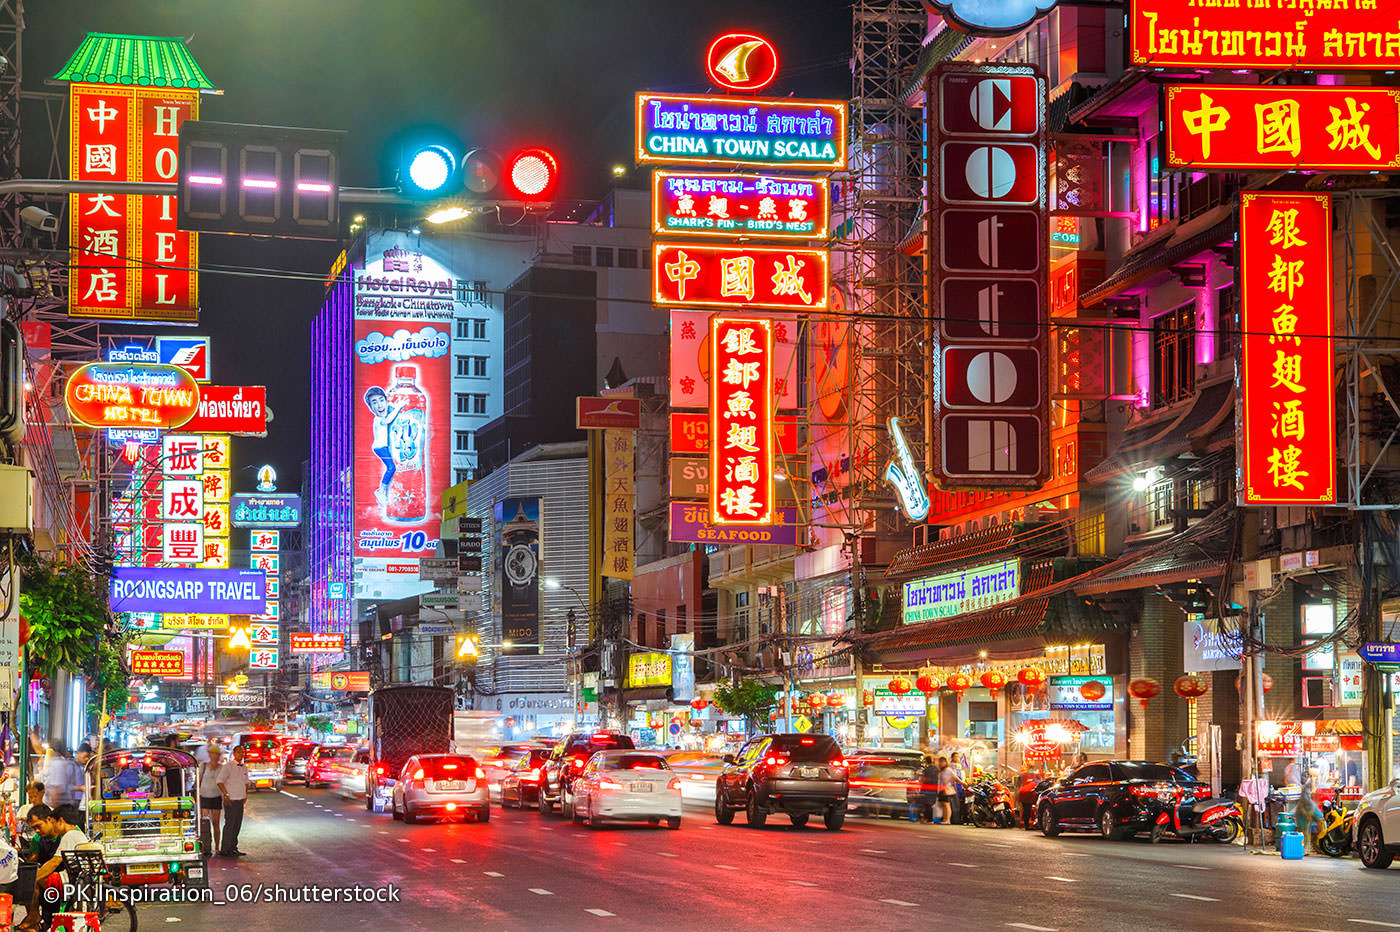 The street never sleeps, Bangkok's China Town offers fantastic foods 2...